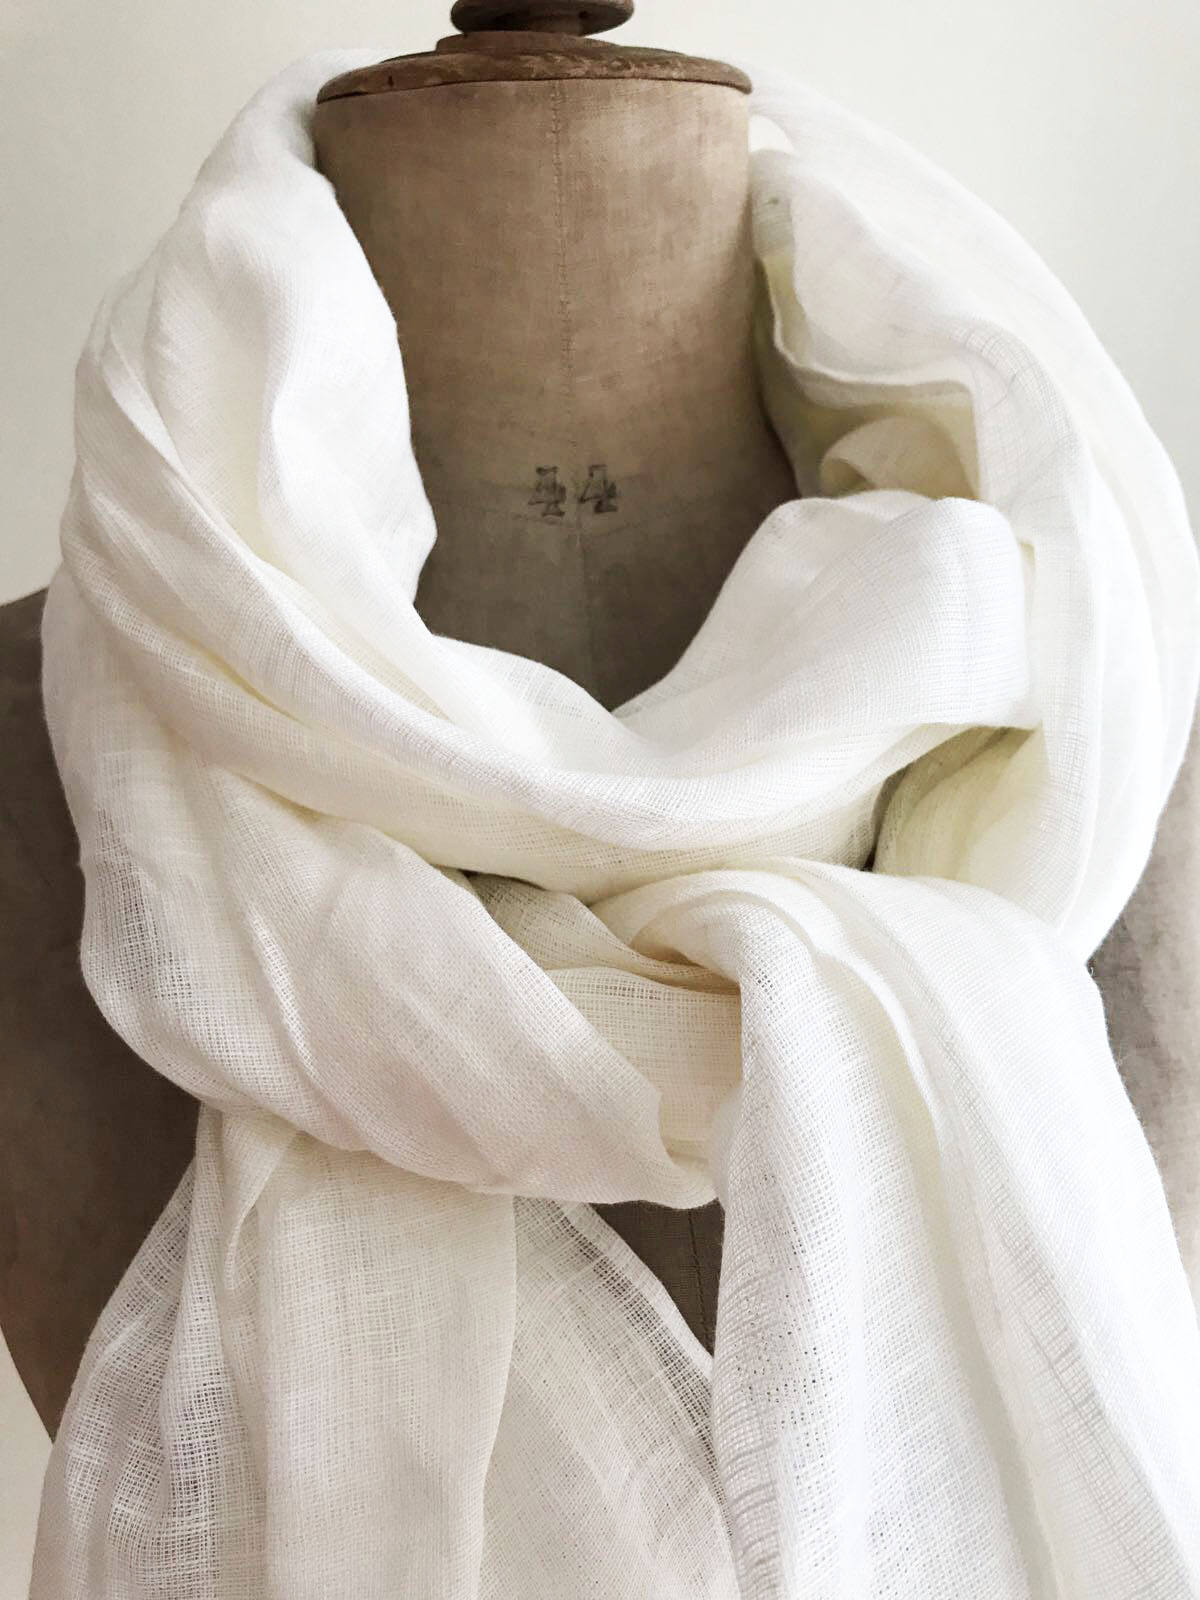 100% Pure Cotton Scarf/lightweight Gauze/extra Long Wrap/ivory White Cotton  Scarf/large White Shawl/womens Mens Scarf 